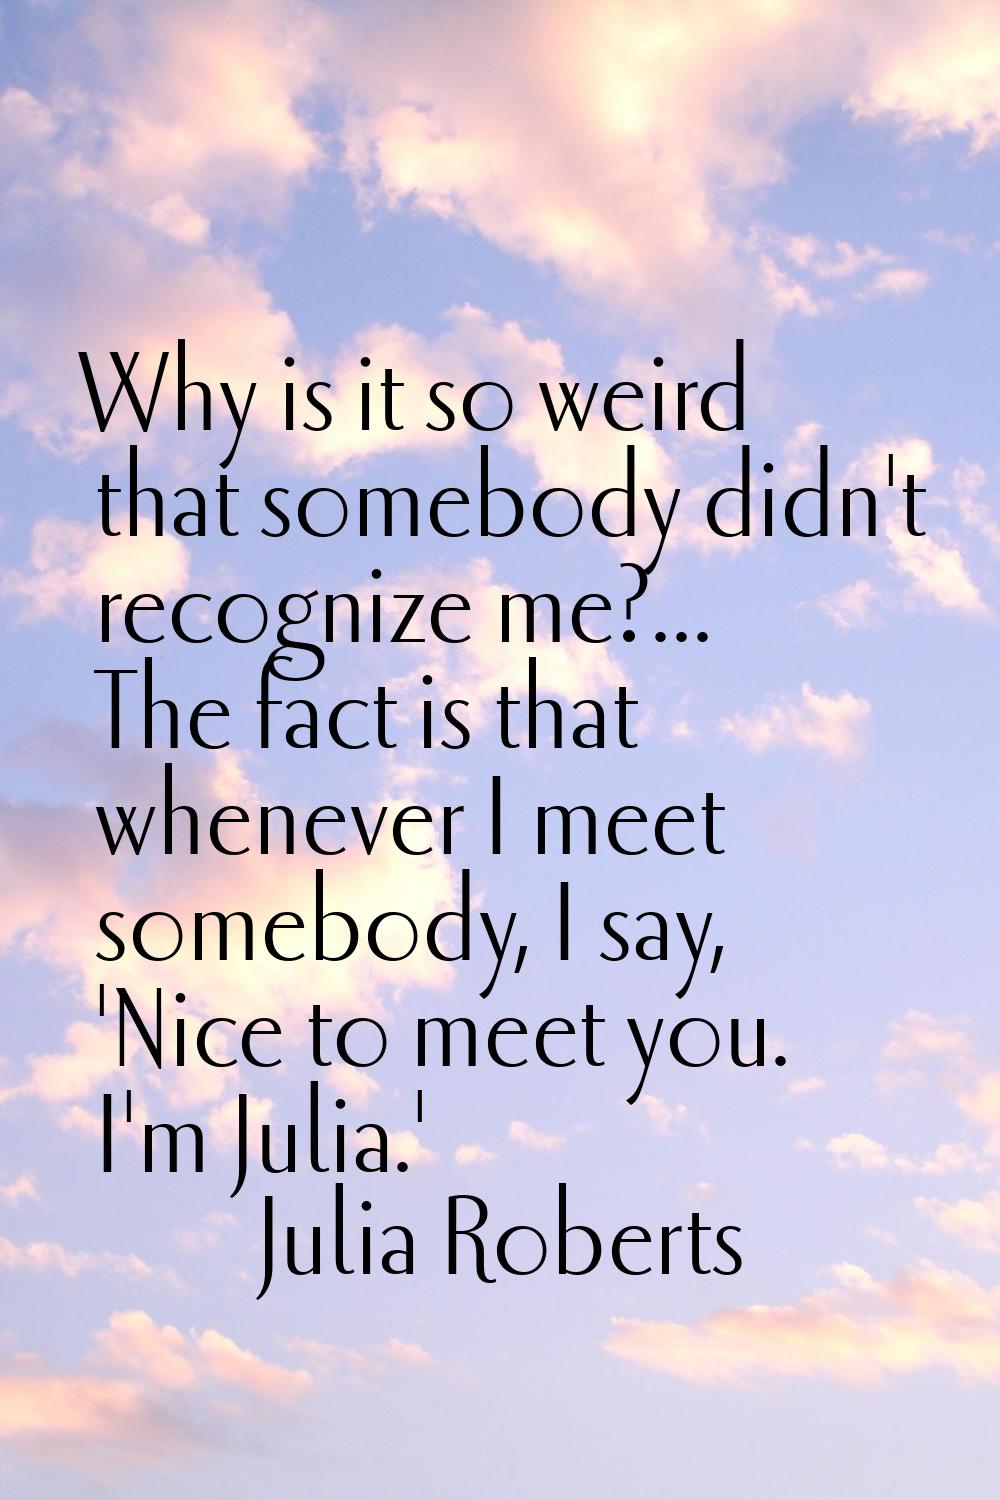 Why is it so weird that somebody didn't recognize me?... The fact is that whenever I meet somebody,